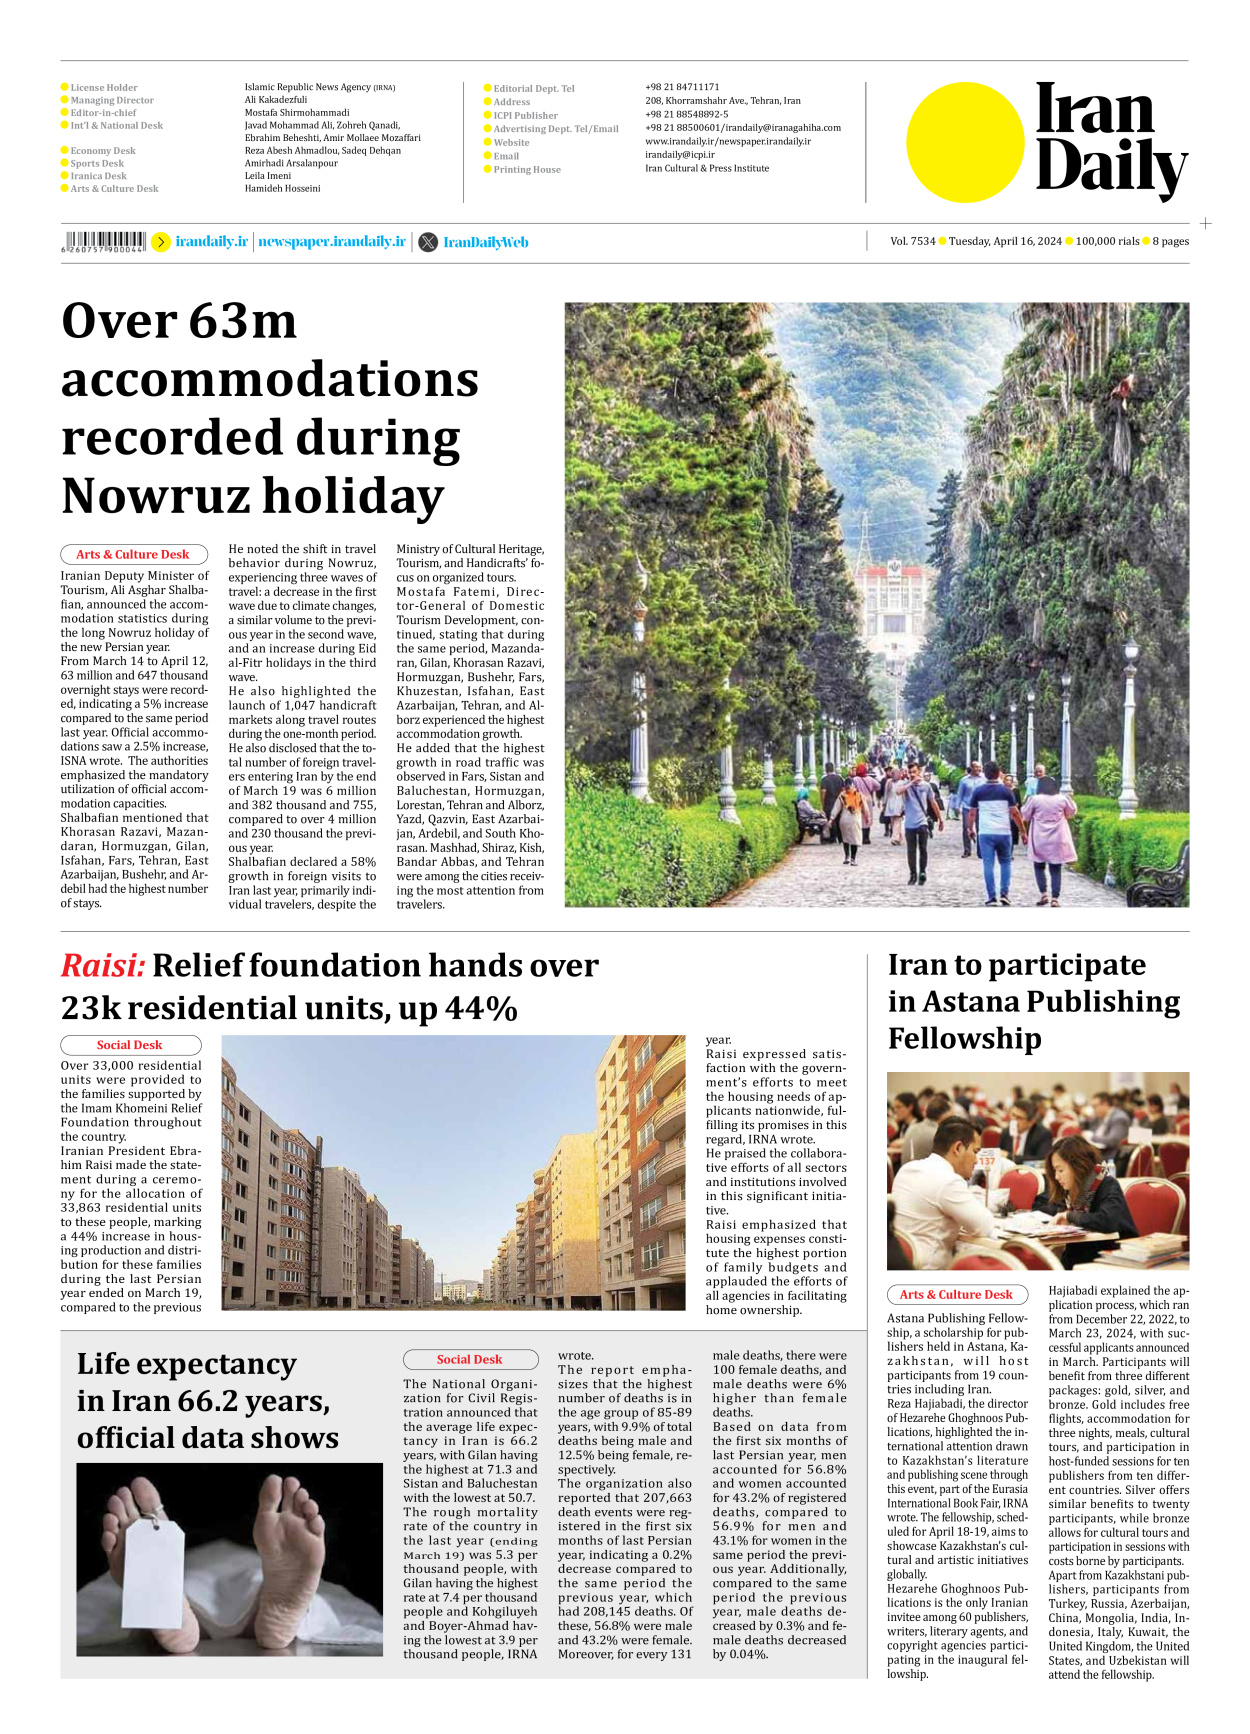 Iran Daily - Number Seven Thousand Five Hundred and Thirty Four - 16 April 2024 - Page 8